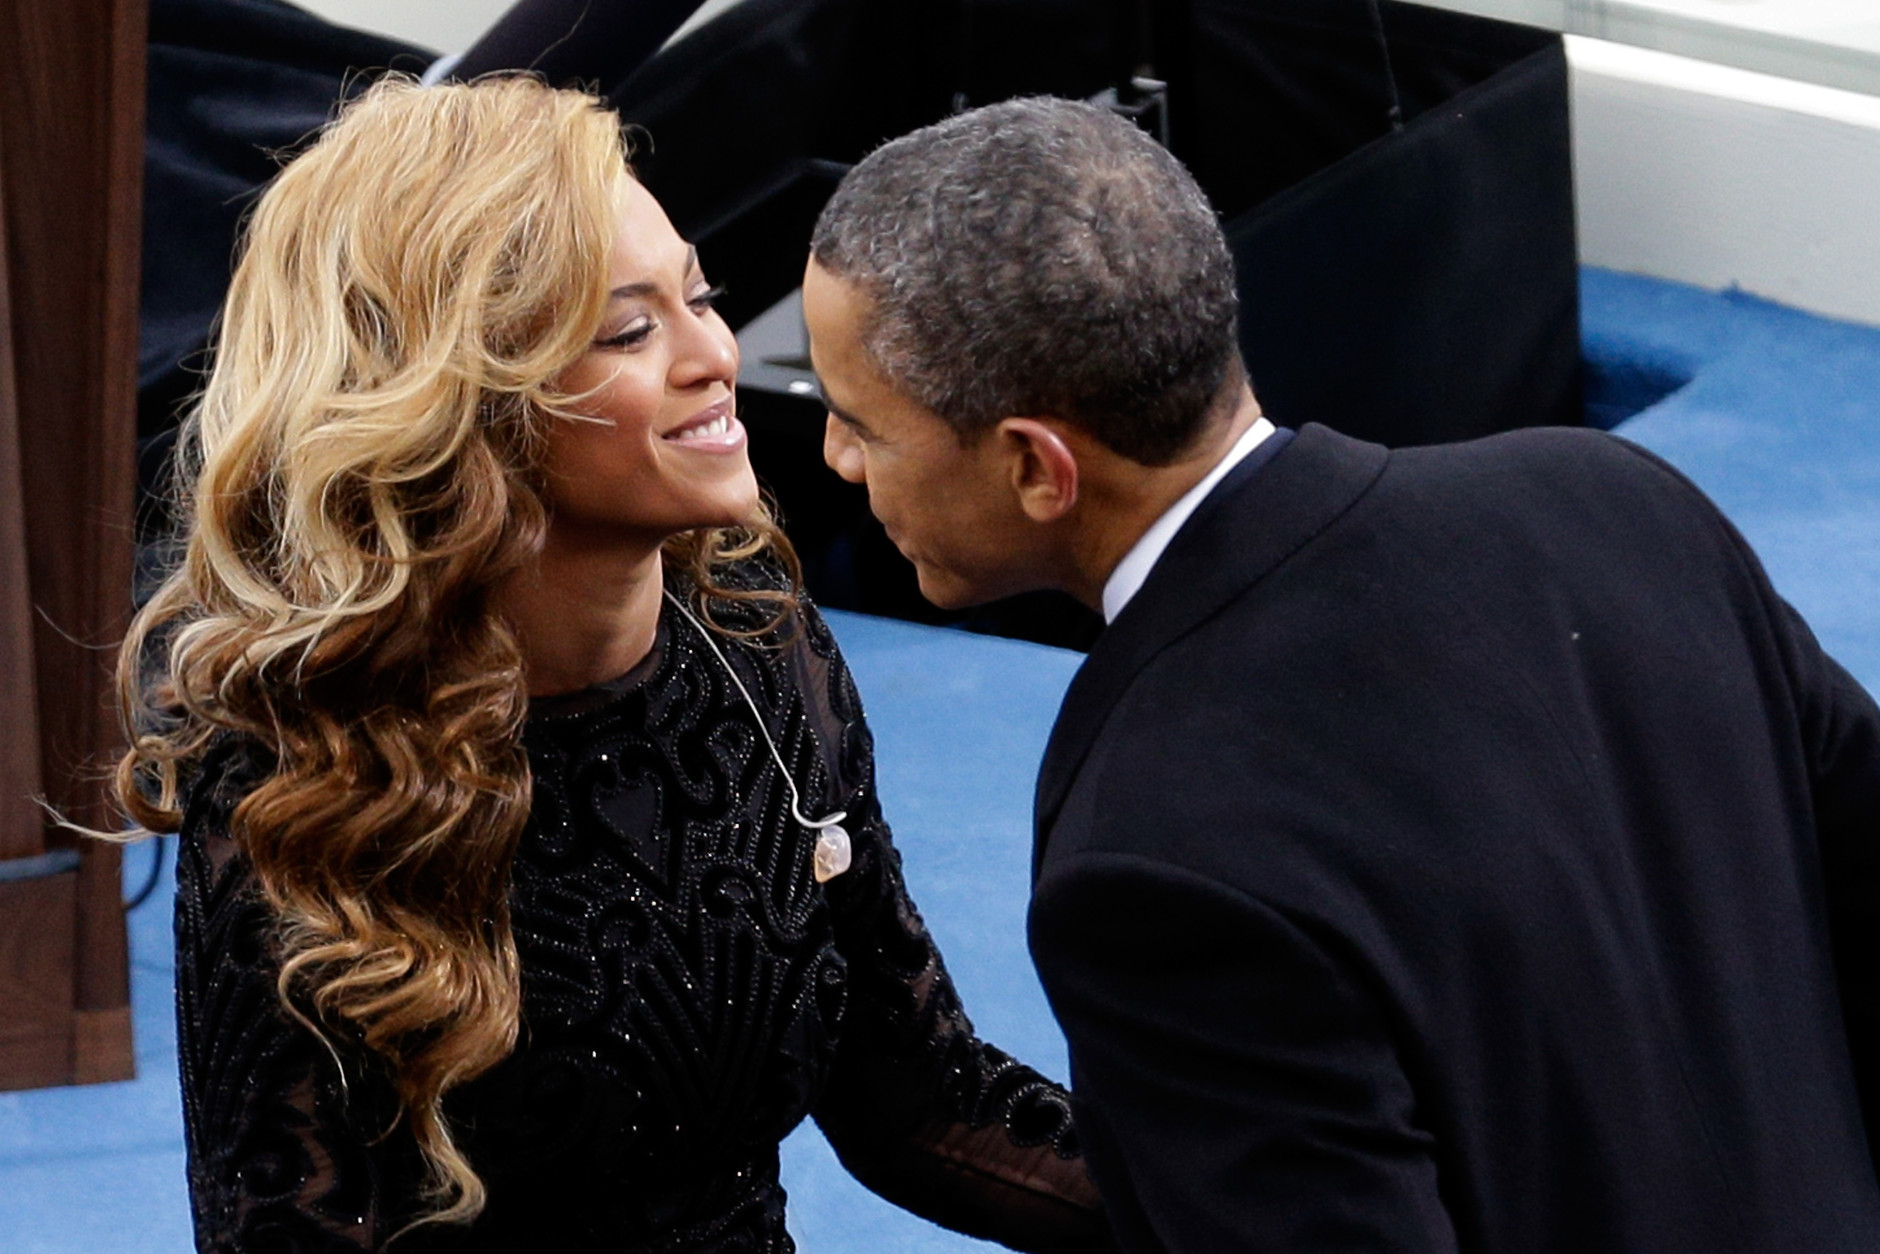 WASHINGTON, DC - JANUARY 21:  U.S. President Barack Obama greets singer Beyonce after she performed the National Anthem during the public ceremonial inauguration on the West Front of the U.S. Capitol January 21, 2013 in Washington, DC. Barack Obama was re-elected for a second term as President of the United States.  (Photo by Rob Carr/Getty Images)